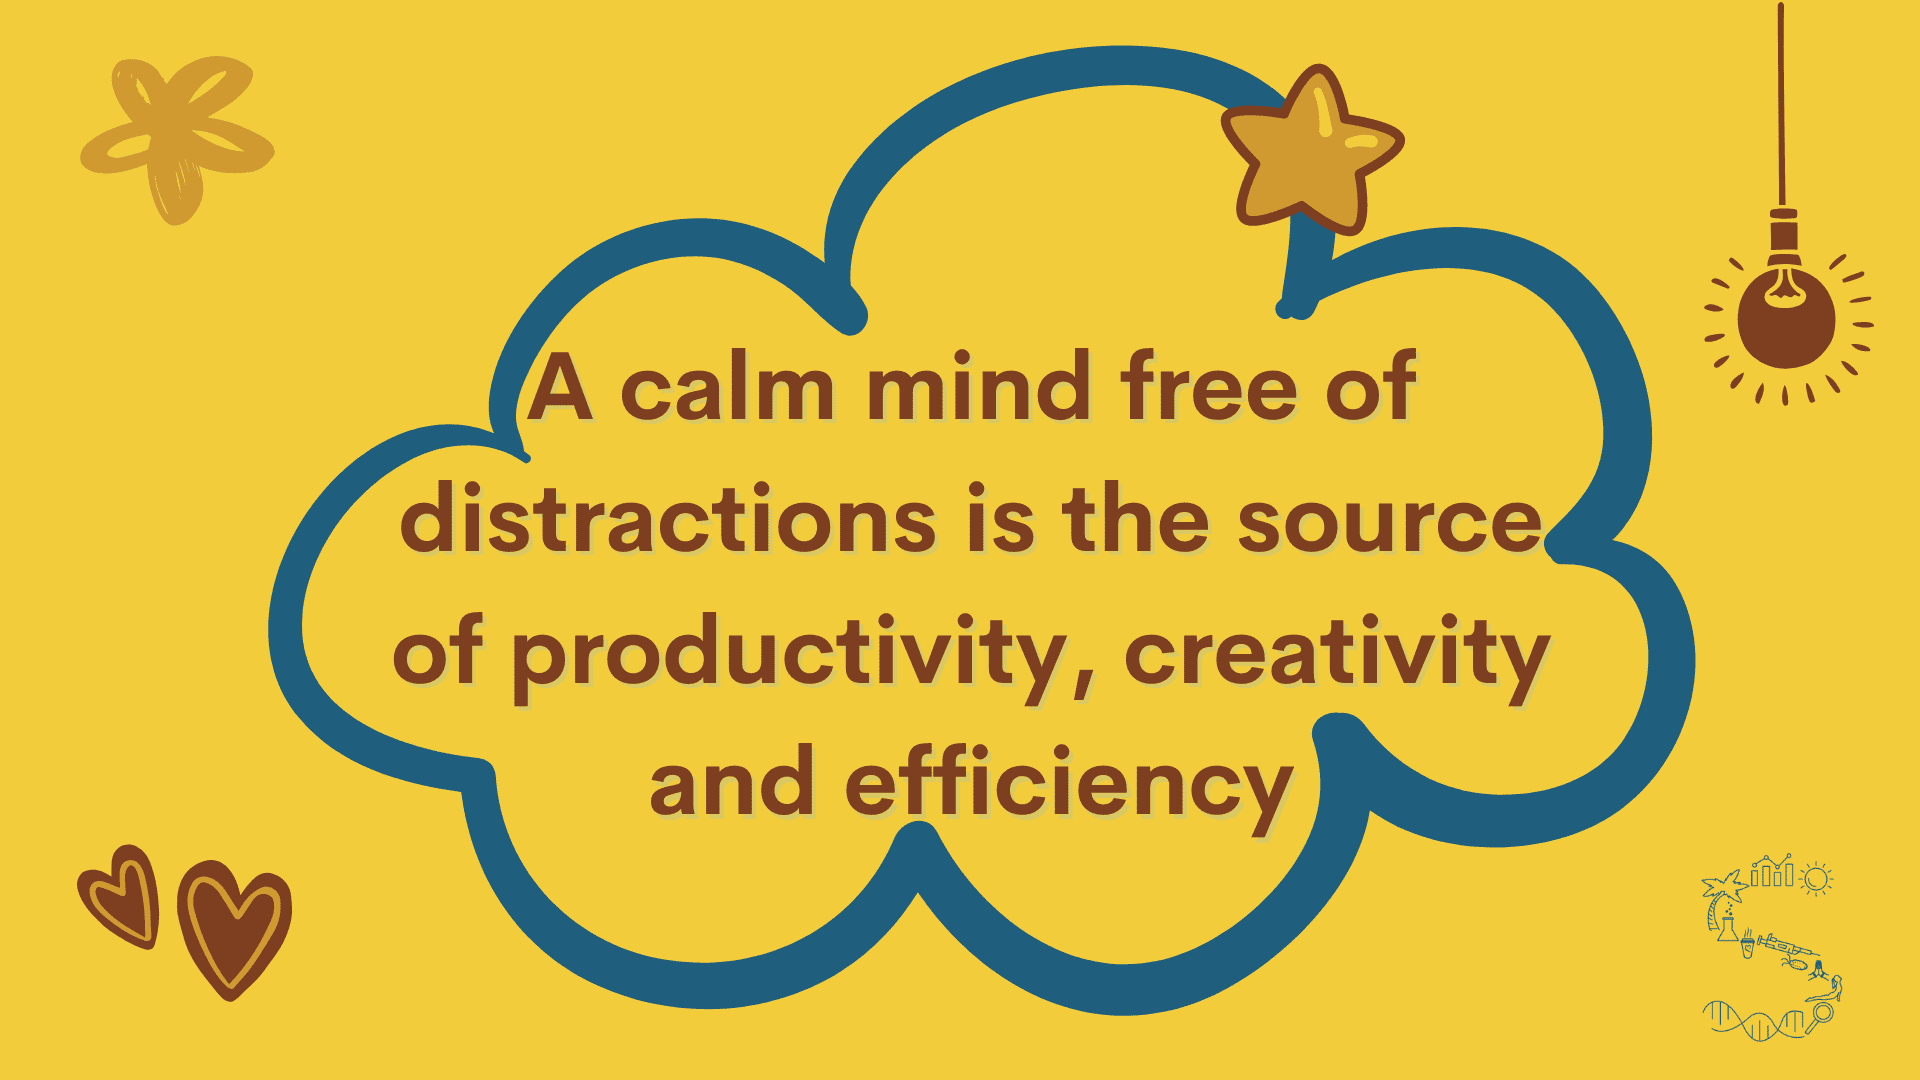 And a calm mind free of distractions like stress and anxiety is the source of high productivity, creativity and efficiency